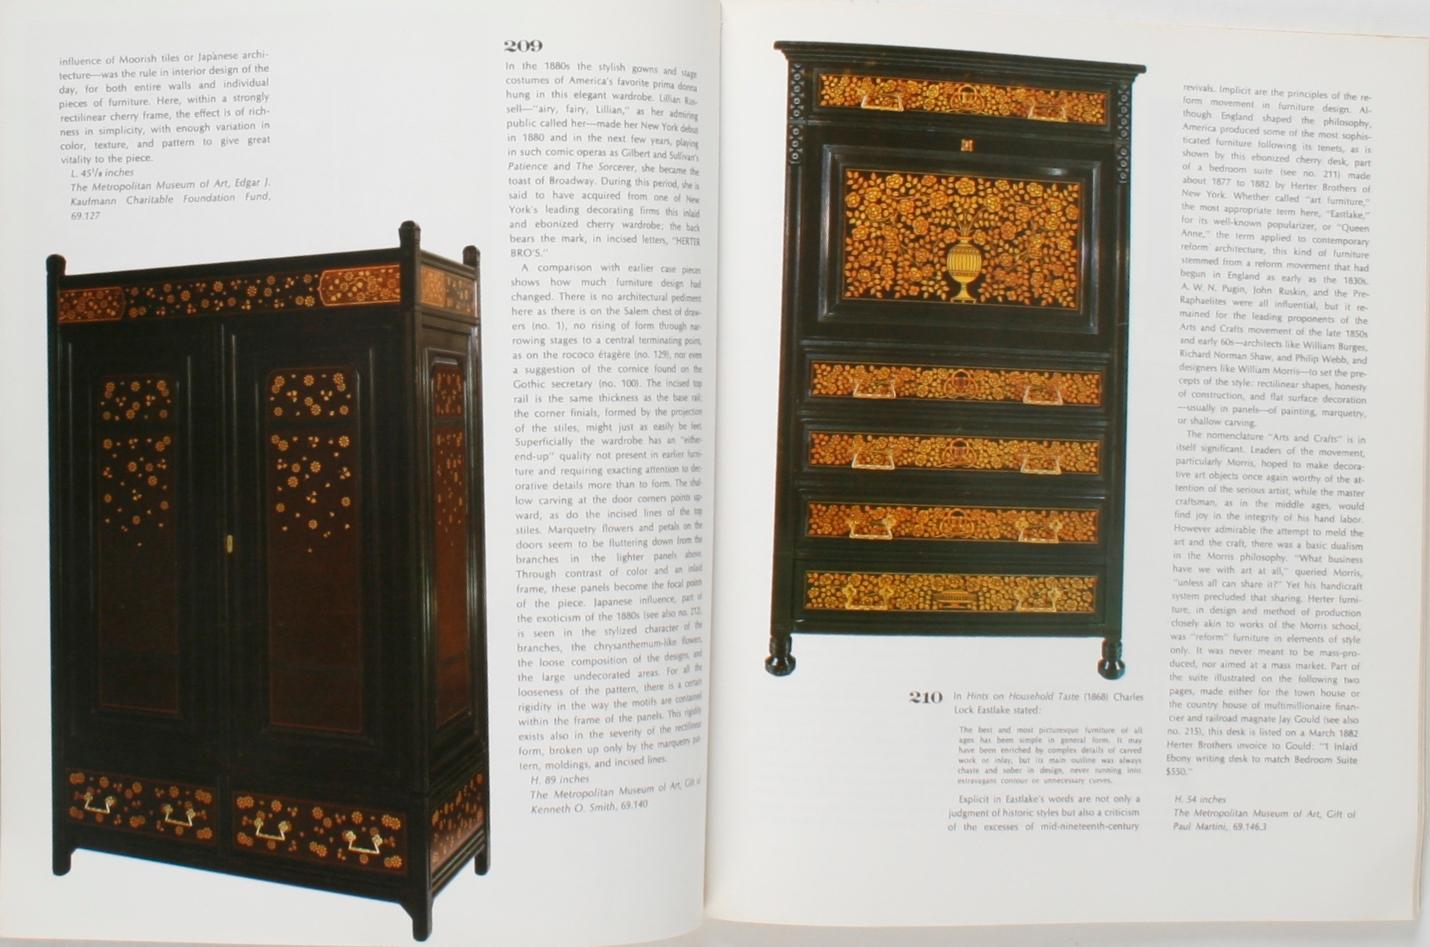 Paper 19th Century America Furniture and Other Decorative Arts by Marvin D. Schwartz For Sale